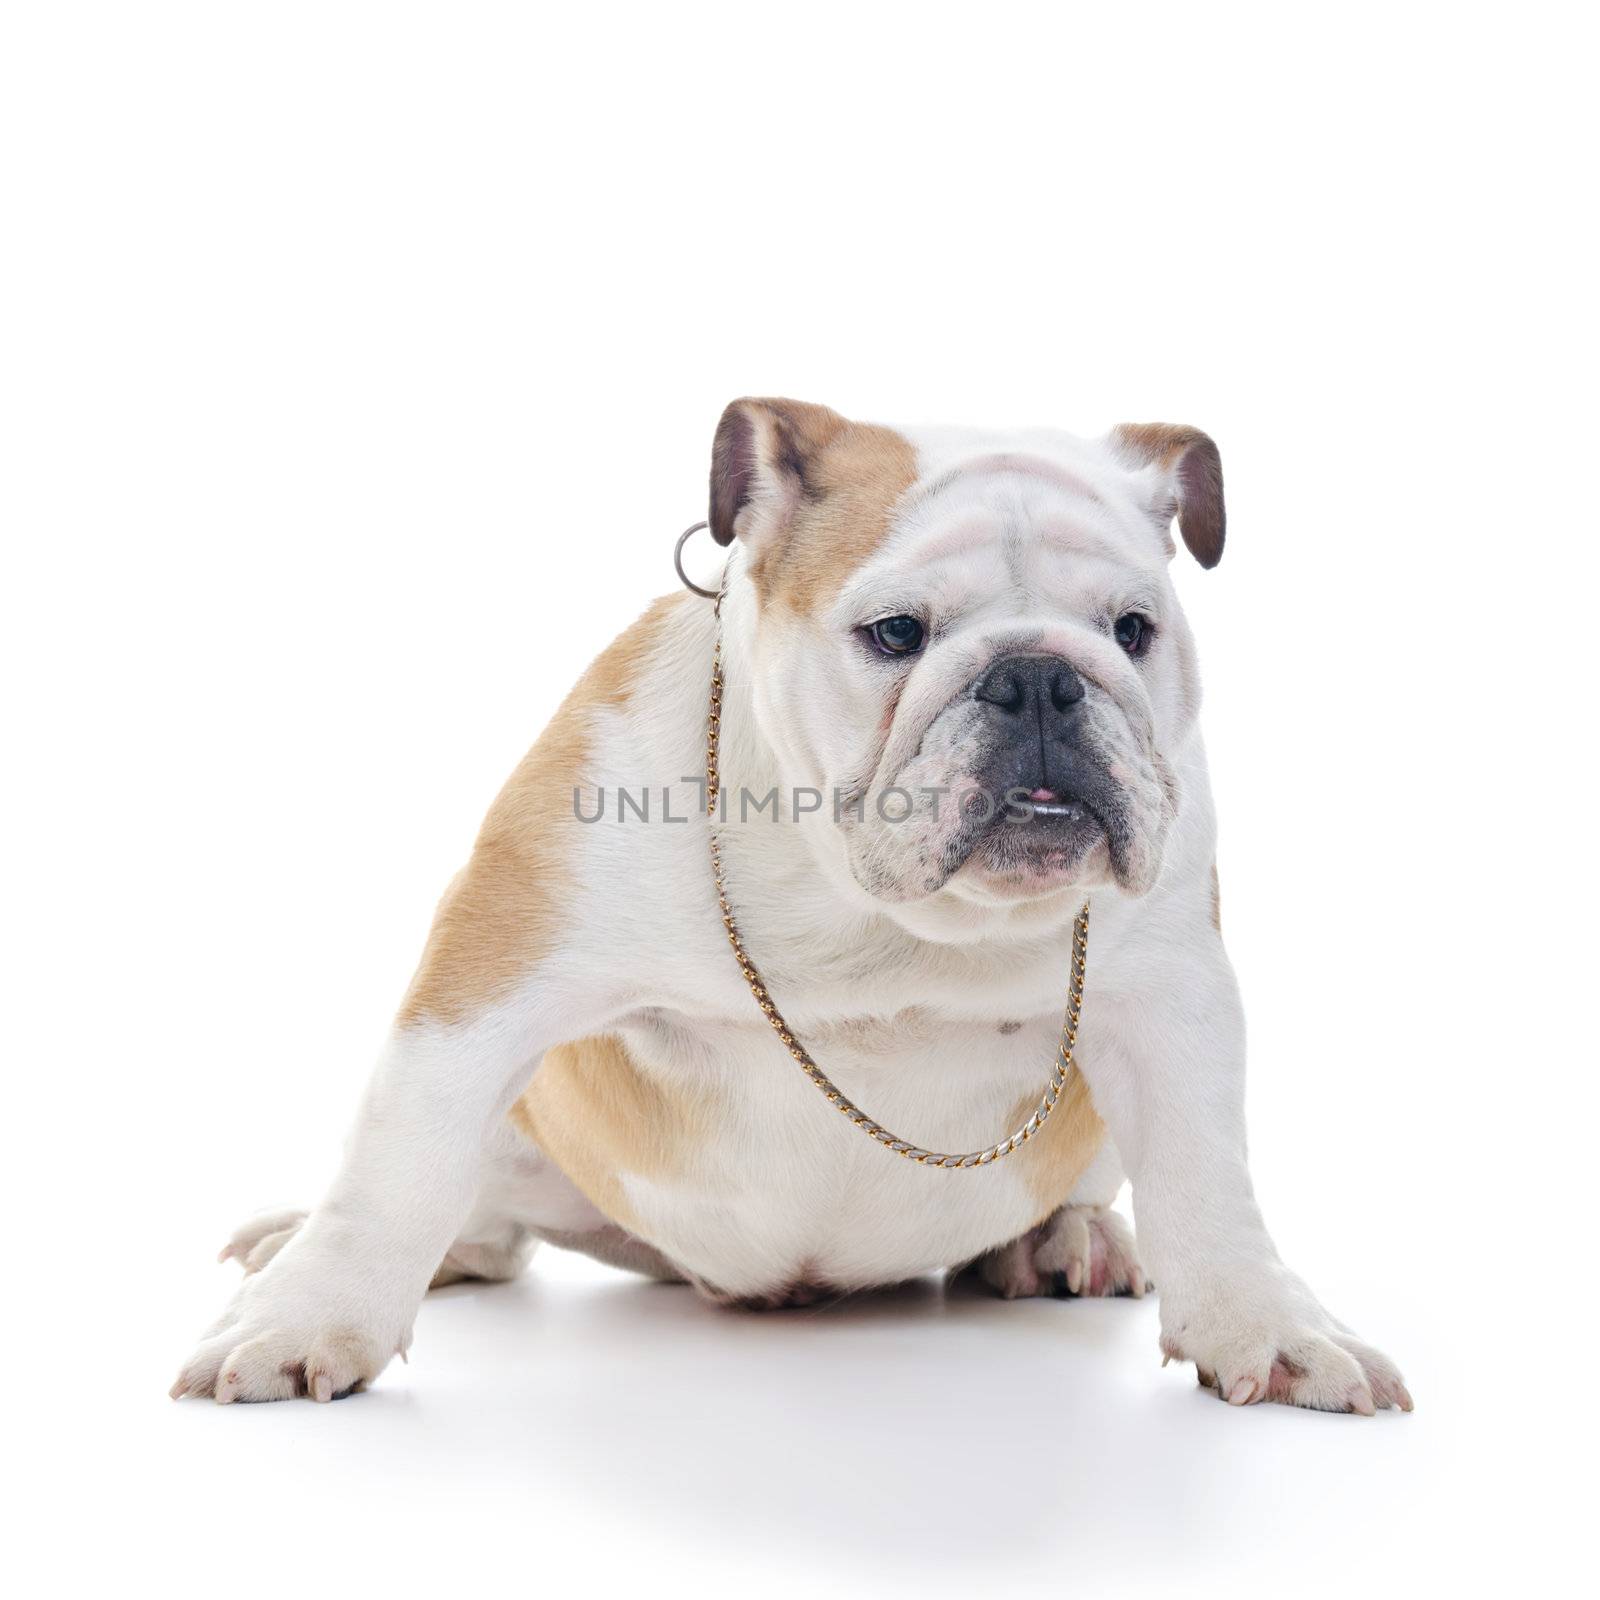 english bulldog dog waring gold colored neckleace sitting and looking off camera, over white